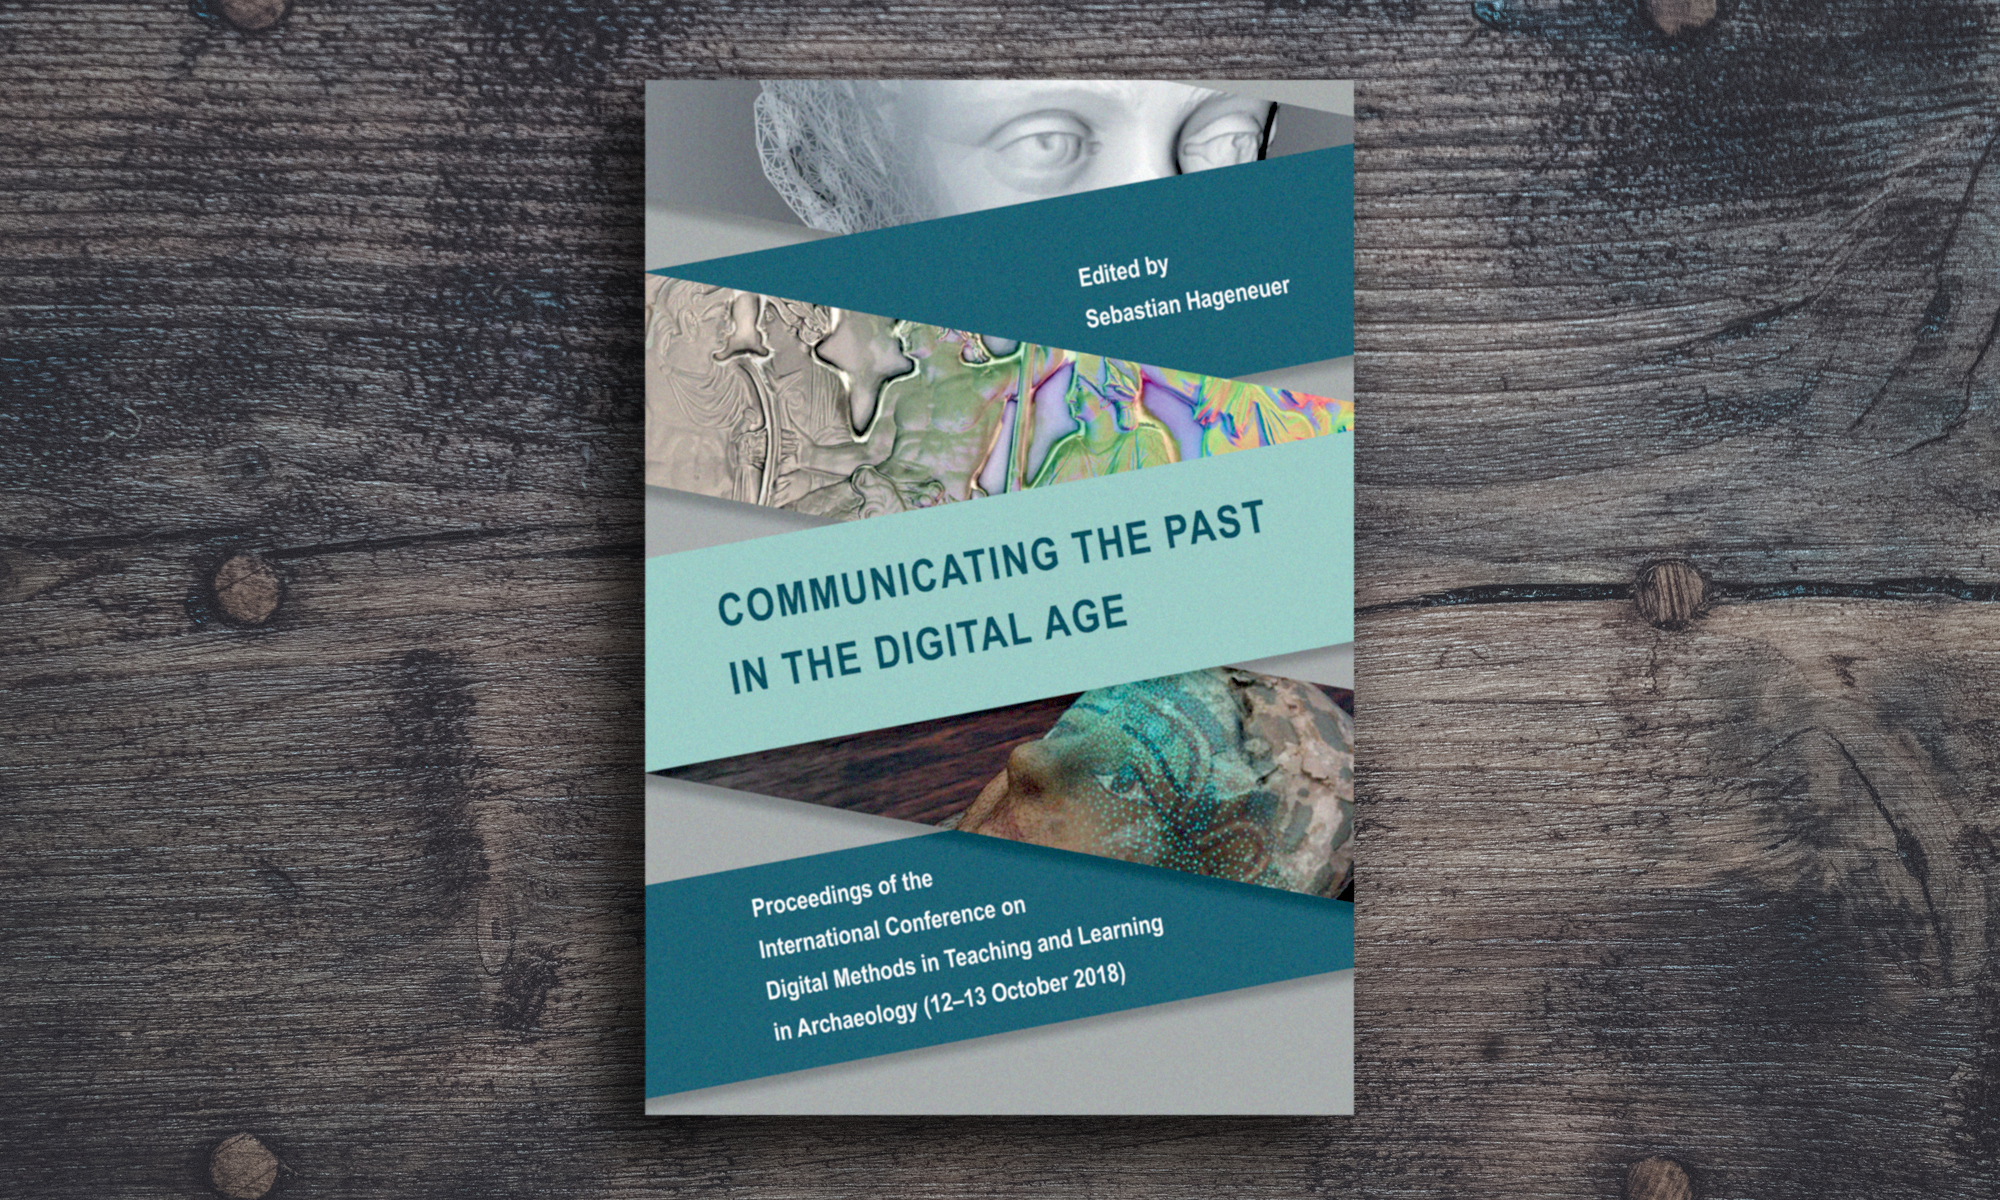 Cover of the book "Communicating the Past in the Digital Age"